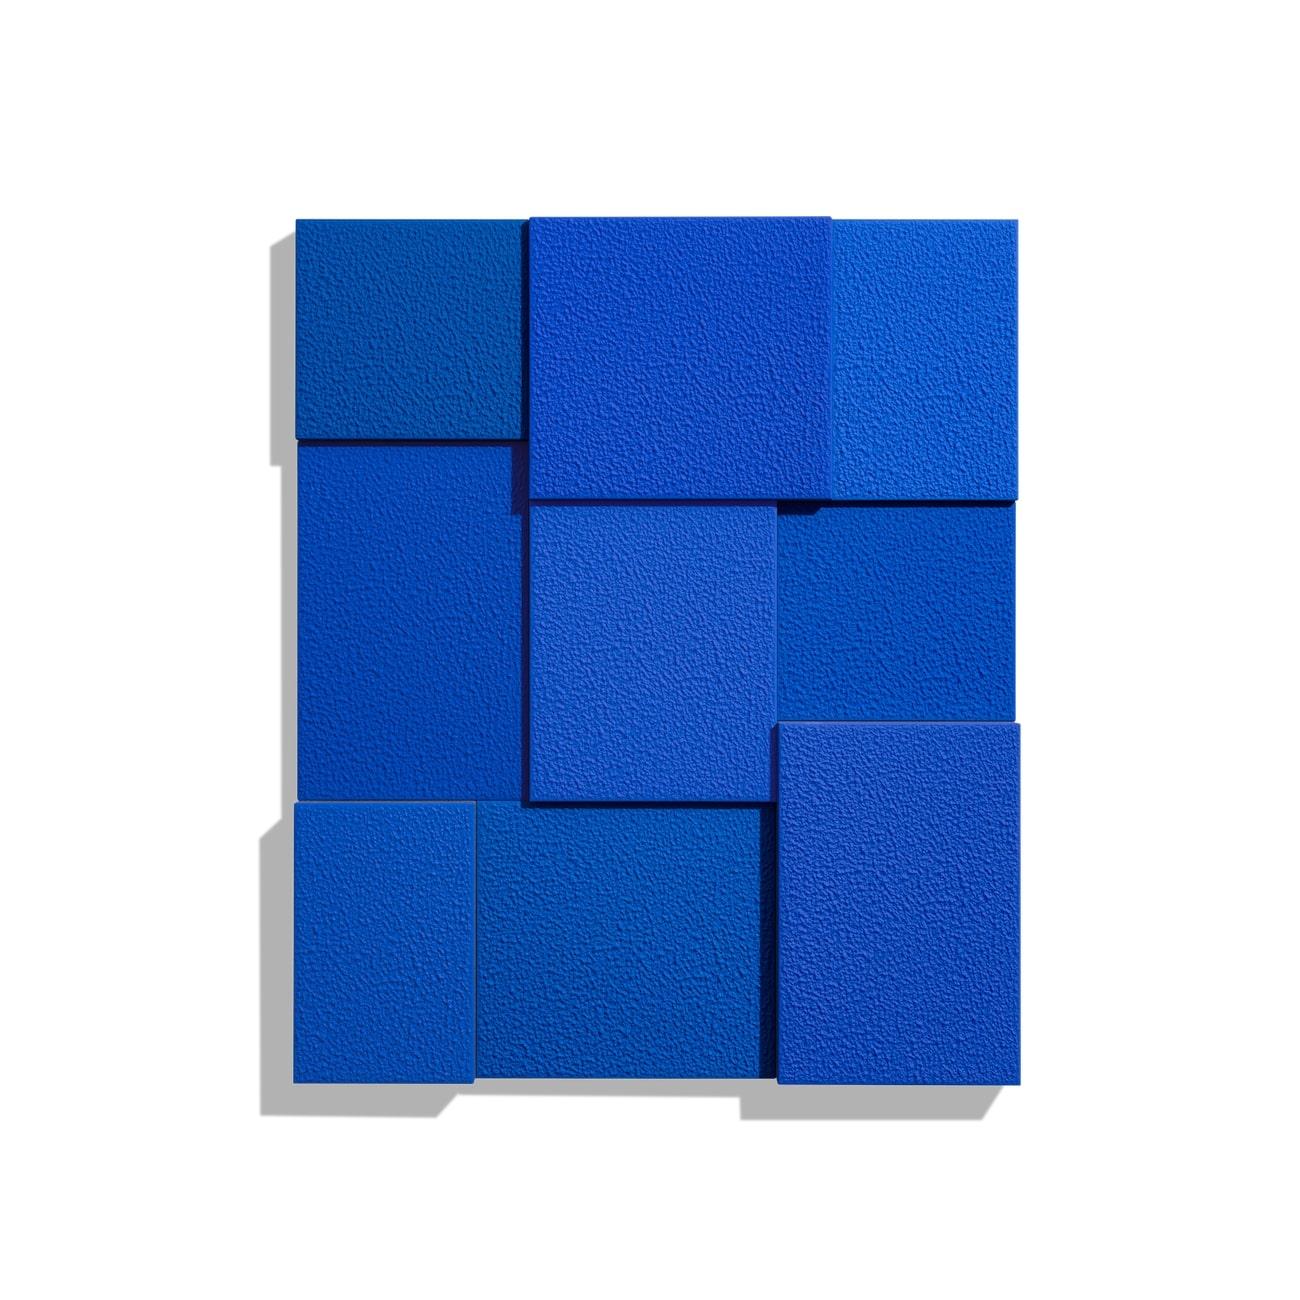 Blue, Nine Times - Print by Peter Halley